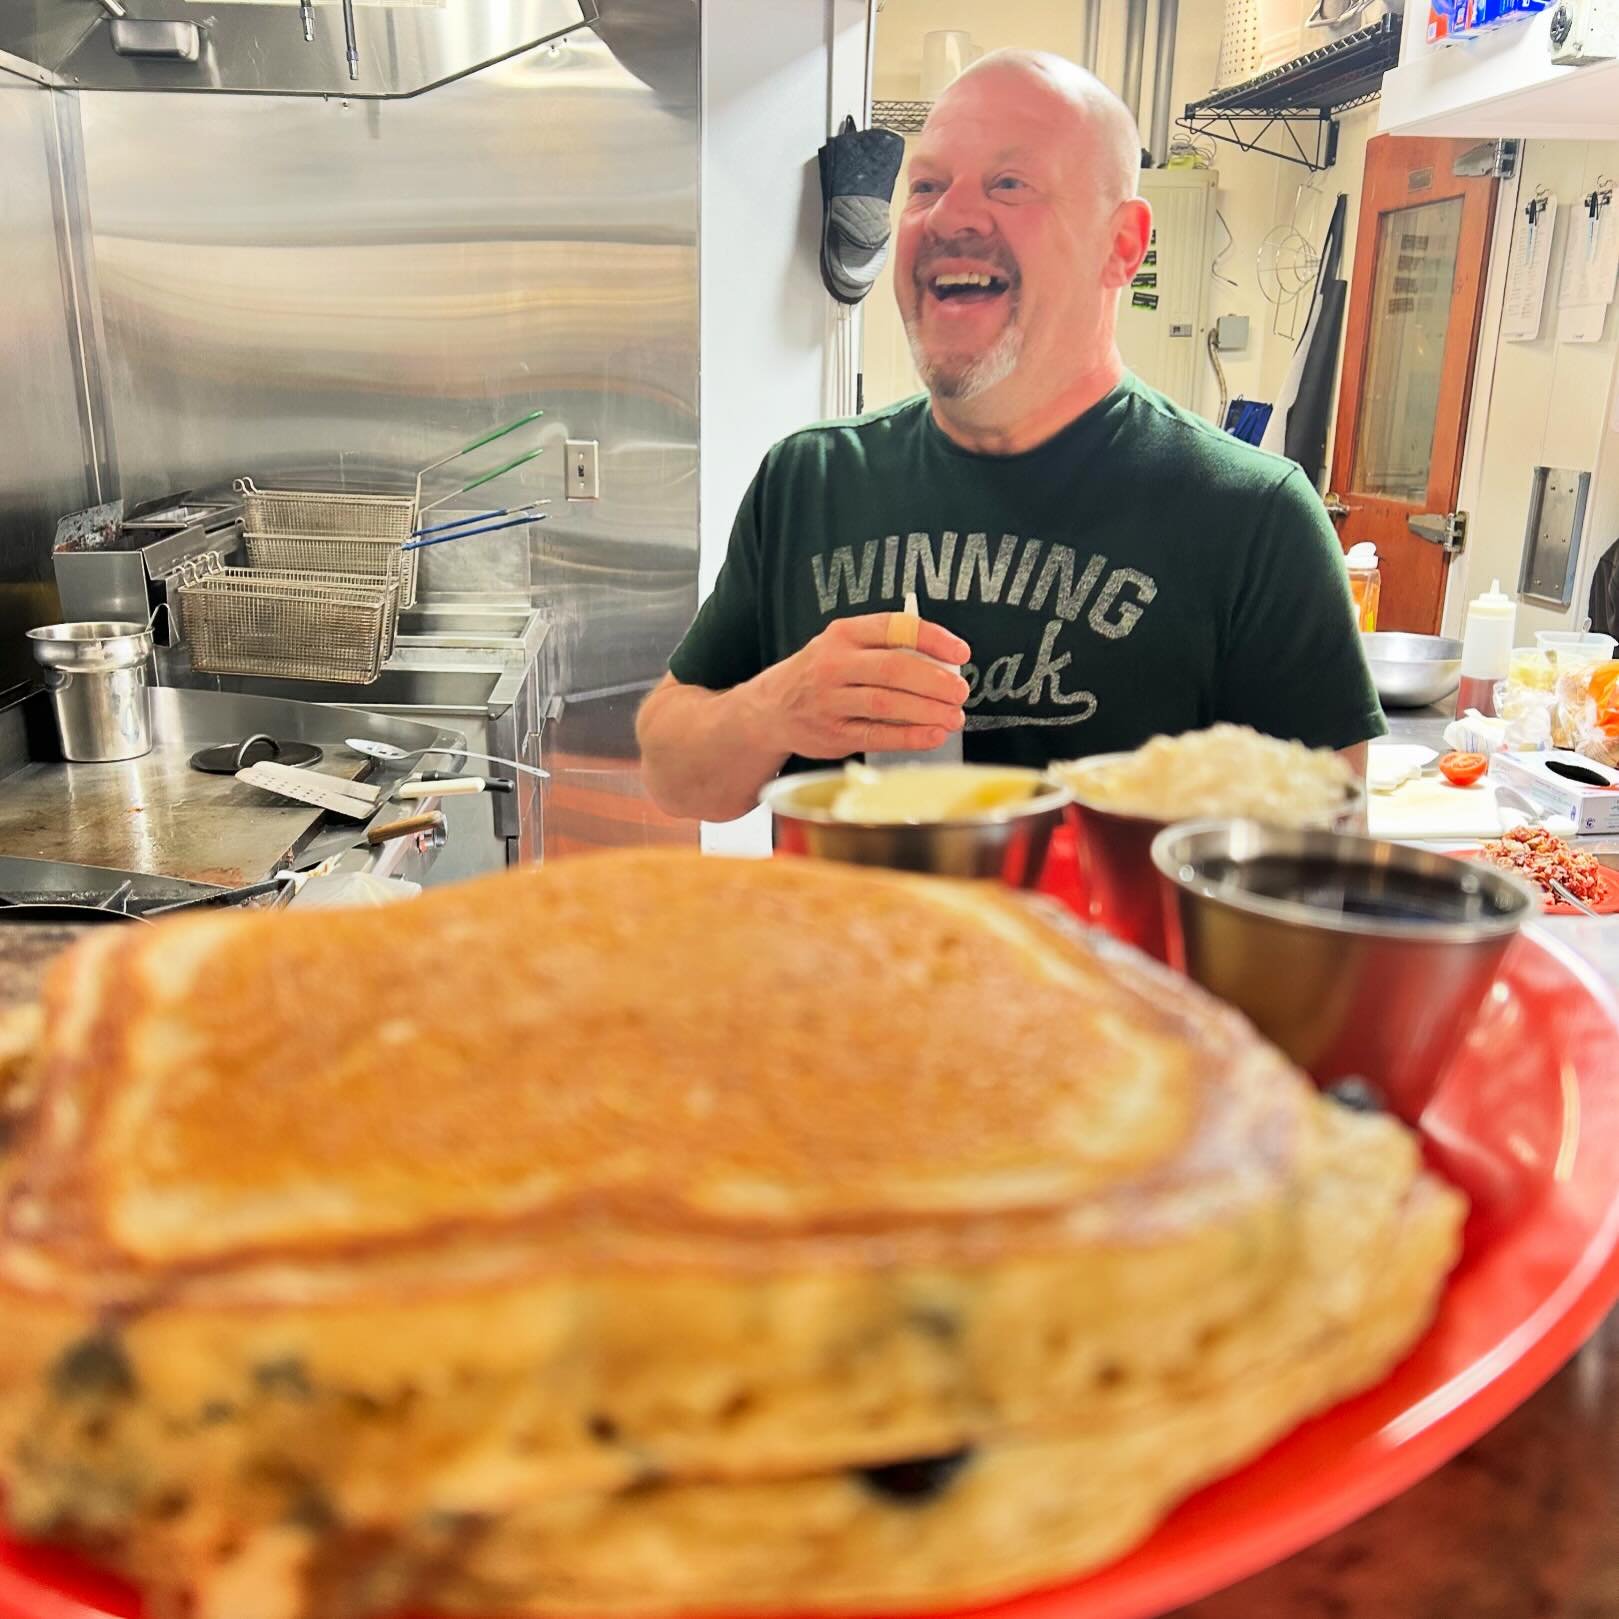 THURSDAY! Chef Scott&rsquo;s Sourdough Pancakes are back today 🥞🥞🥞 stuffed with Maine wild blueberries 🫐🫐🫐 and served with @truemountainmaple maple syrup 🍁🍁🍁 Join us for inside and outside dining or order takeout/delivery online at www.rootd